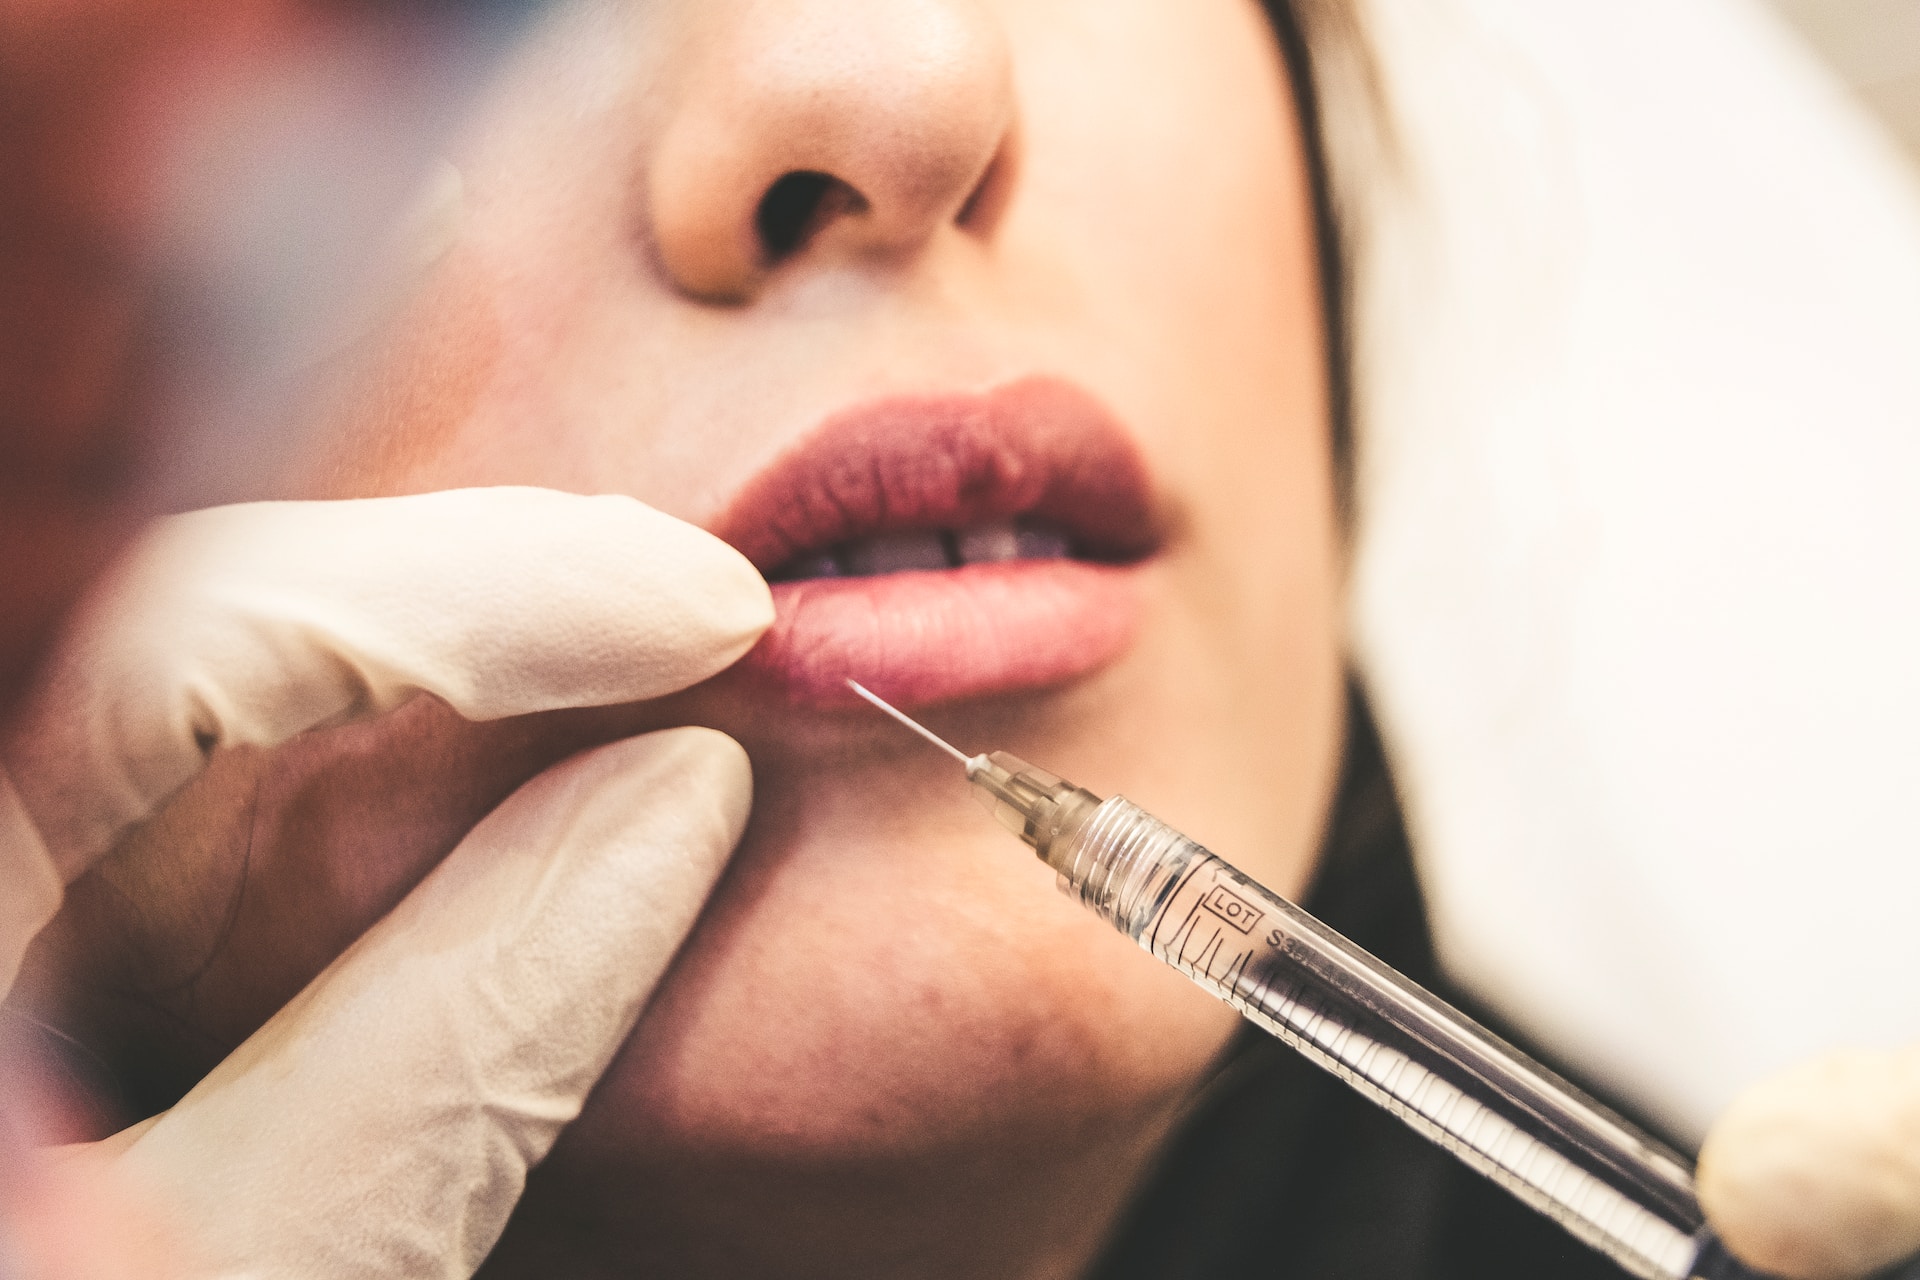 Botox and Injectable fillers